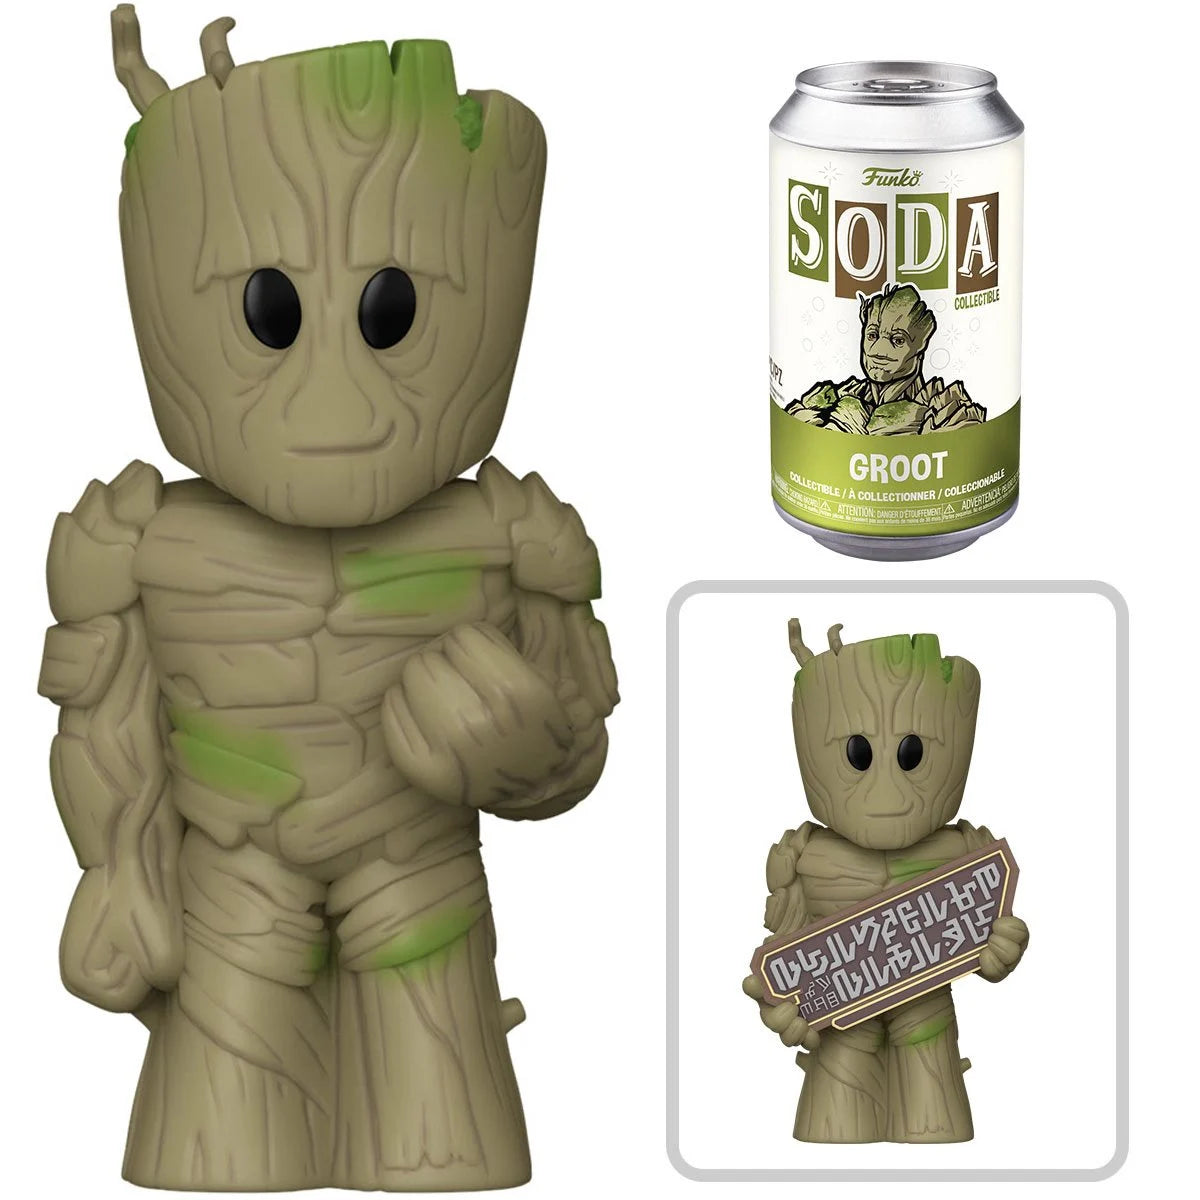 Groot Guardians of the Galaxy Volume 3 Funko Vinyl Soda w/ Chance of chase!